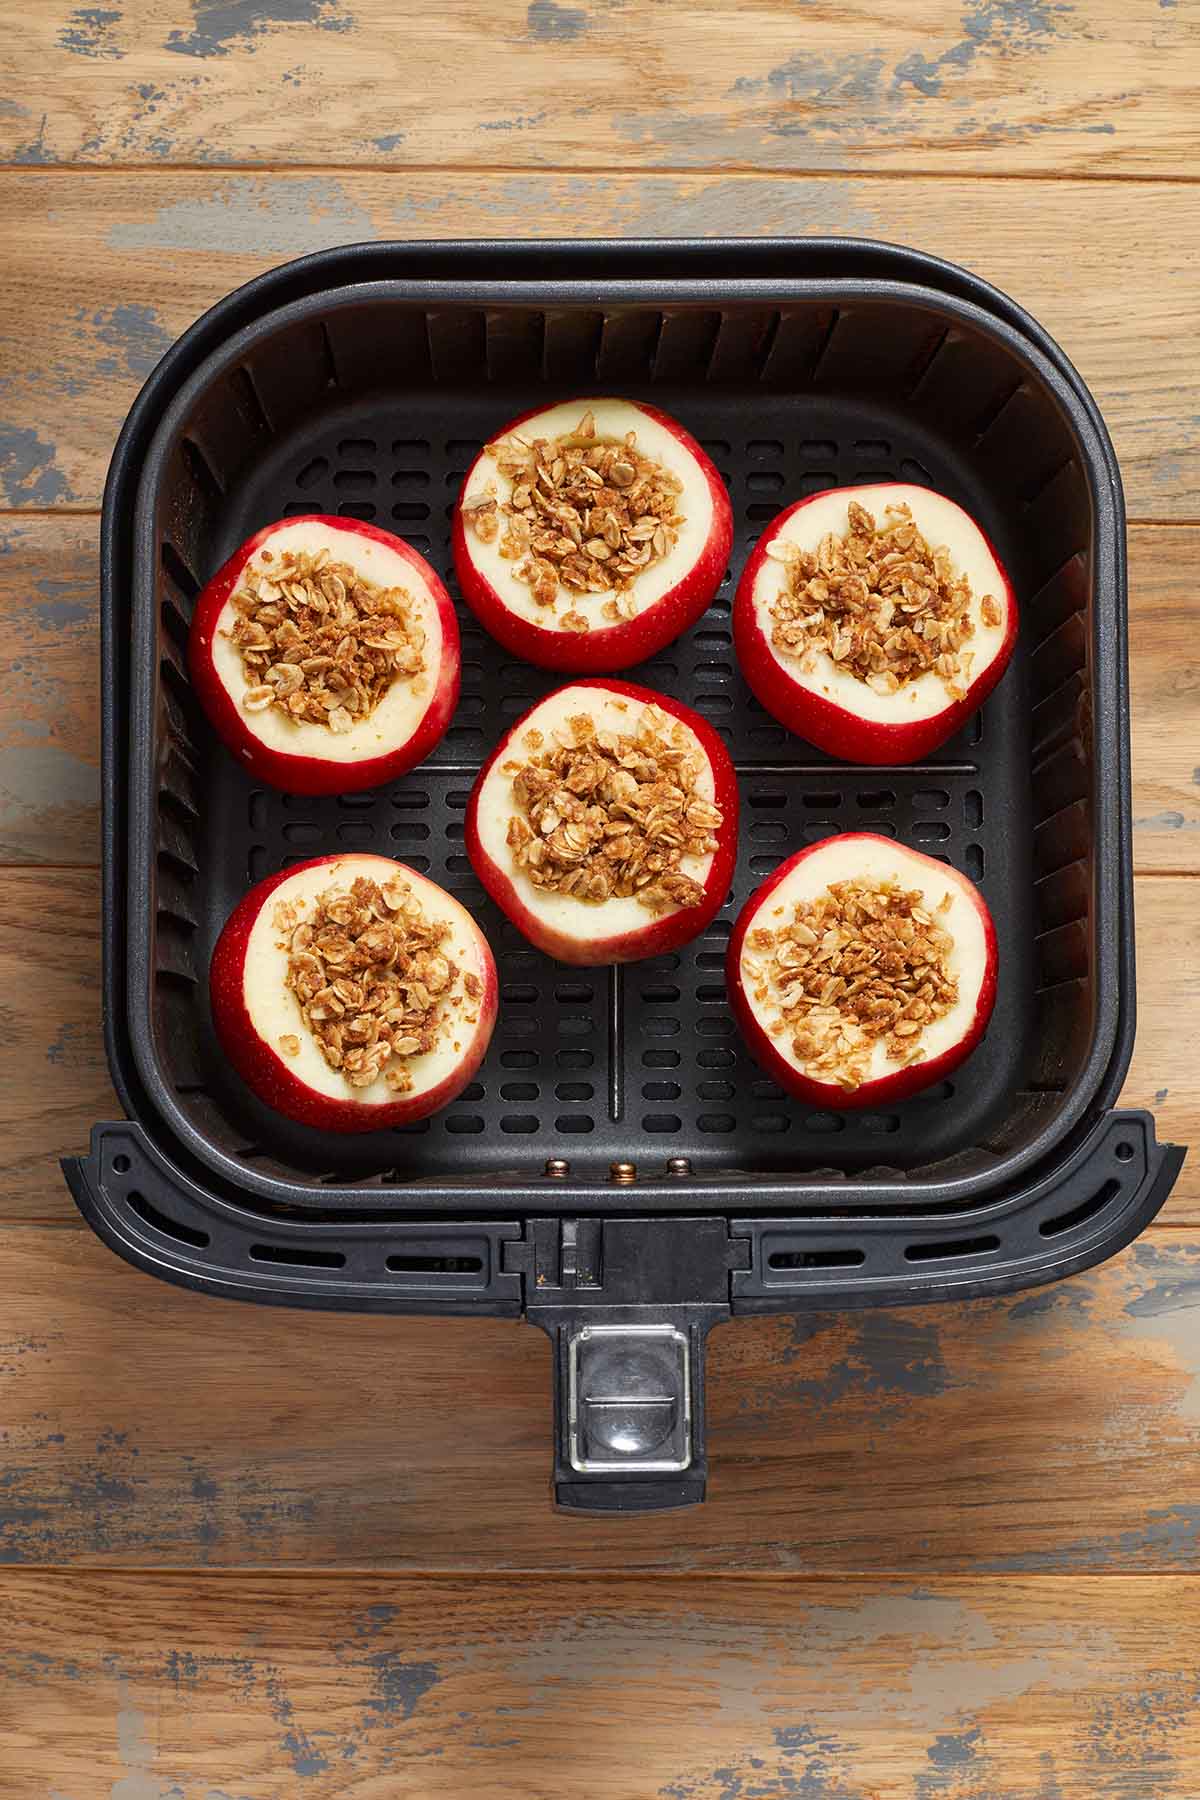 Pre-cooked stuffed apples in the air fryer basket.